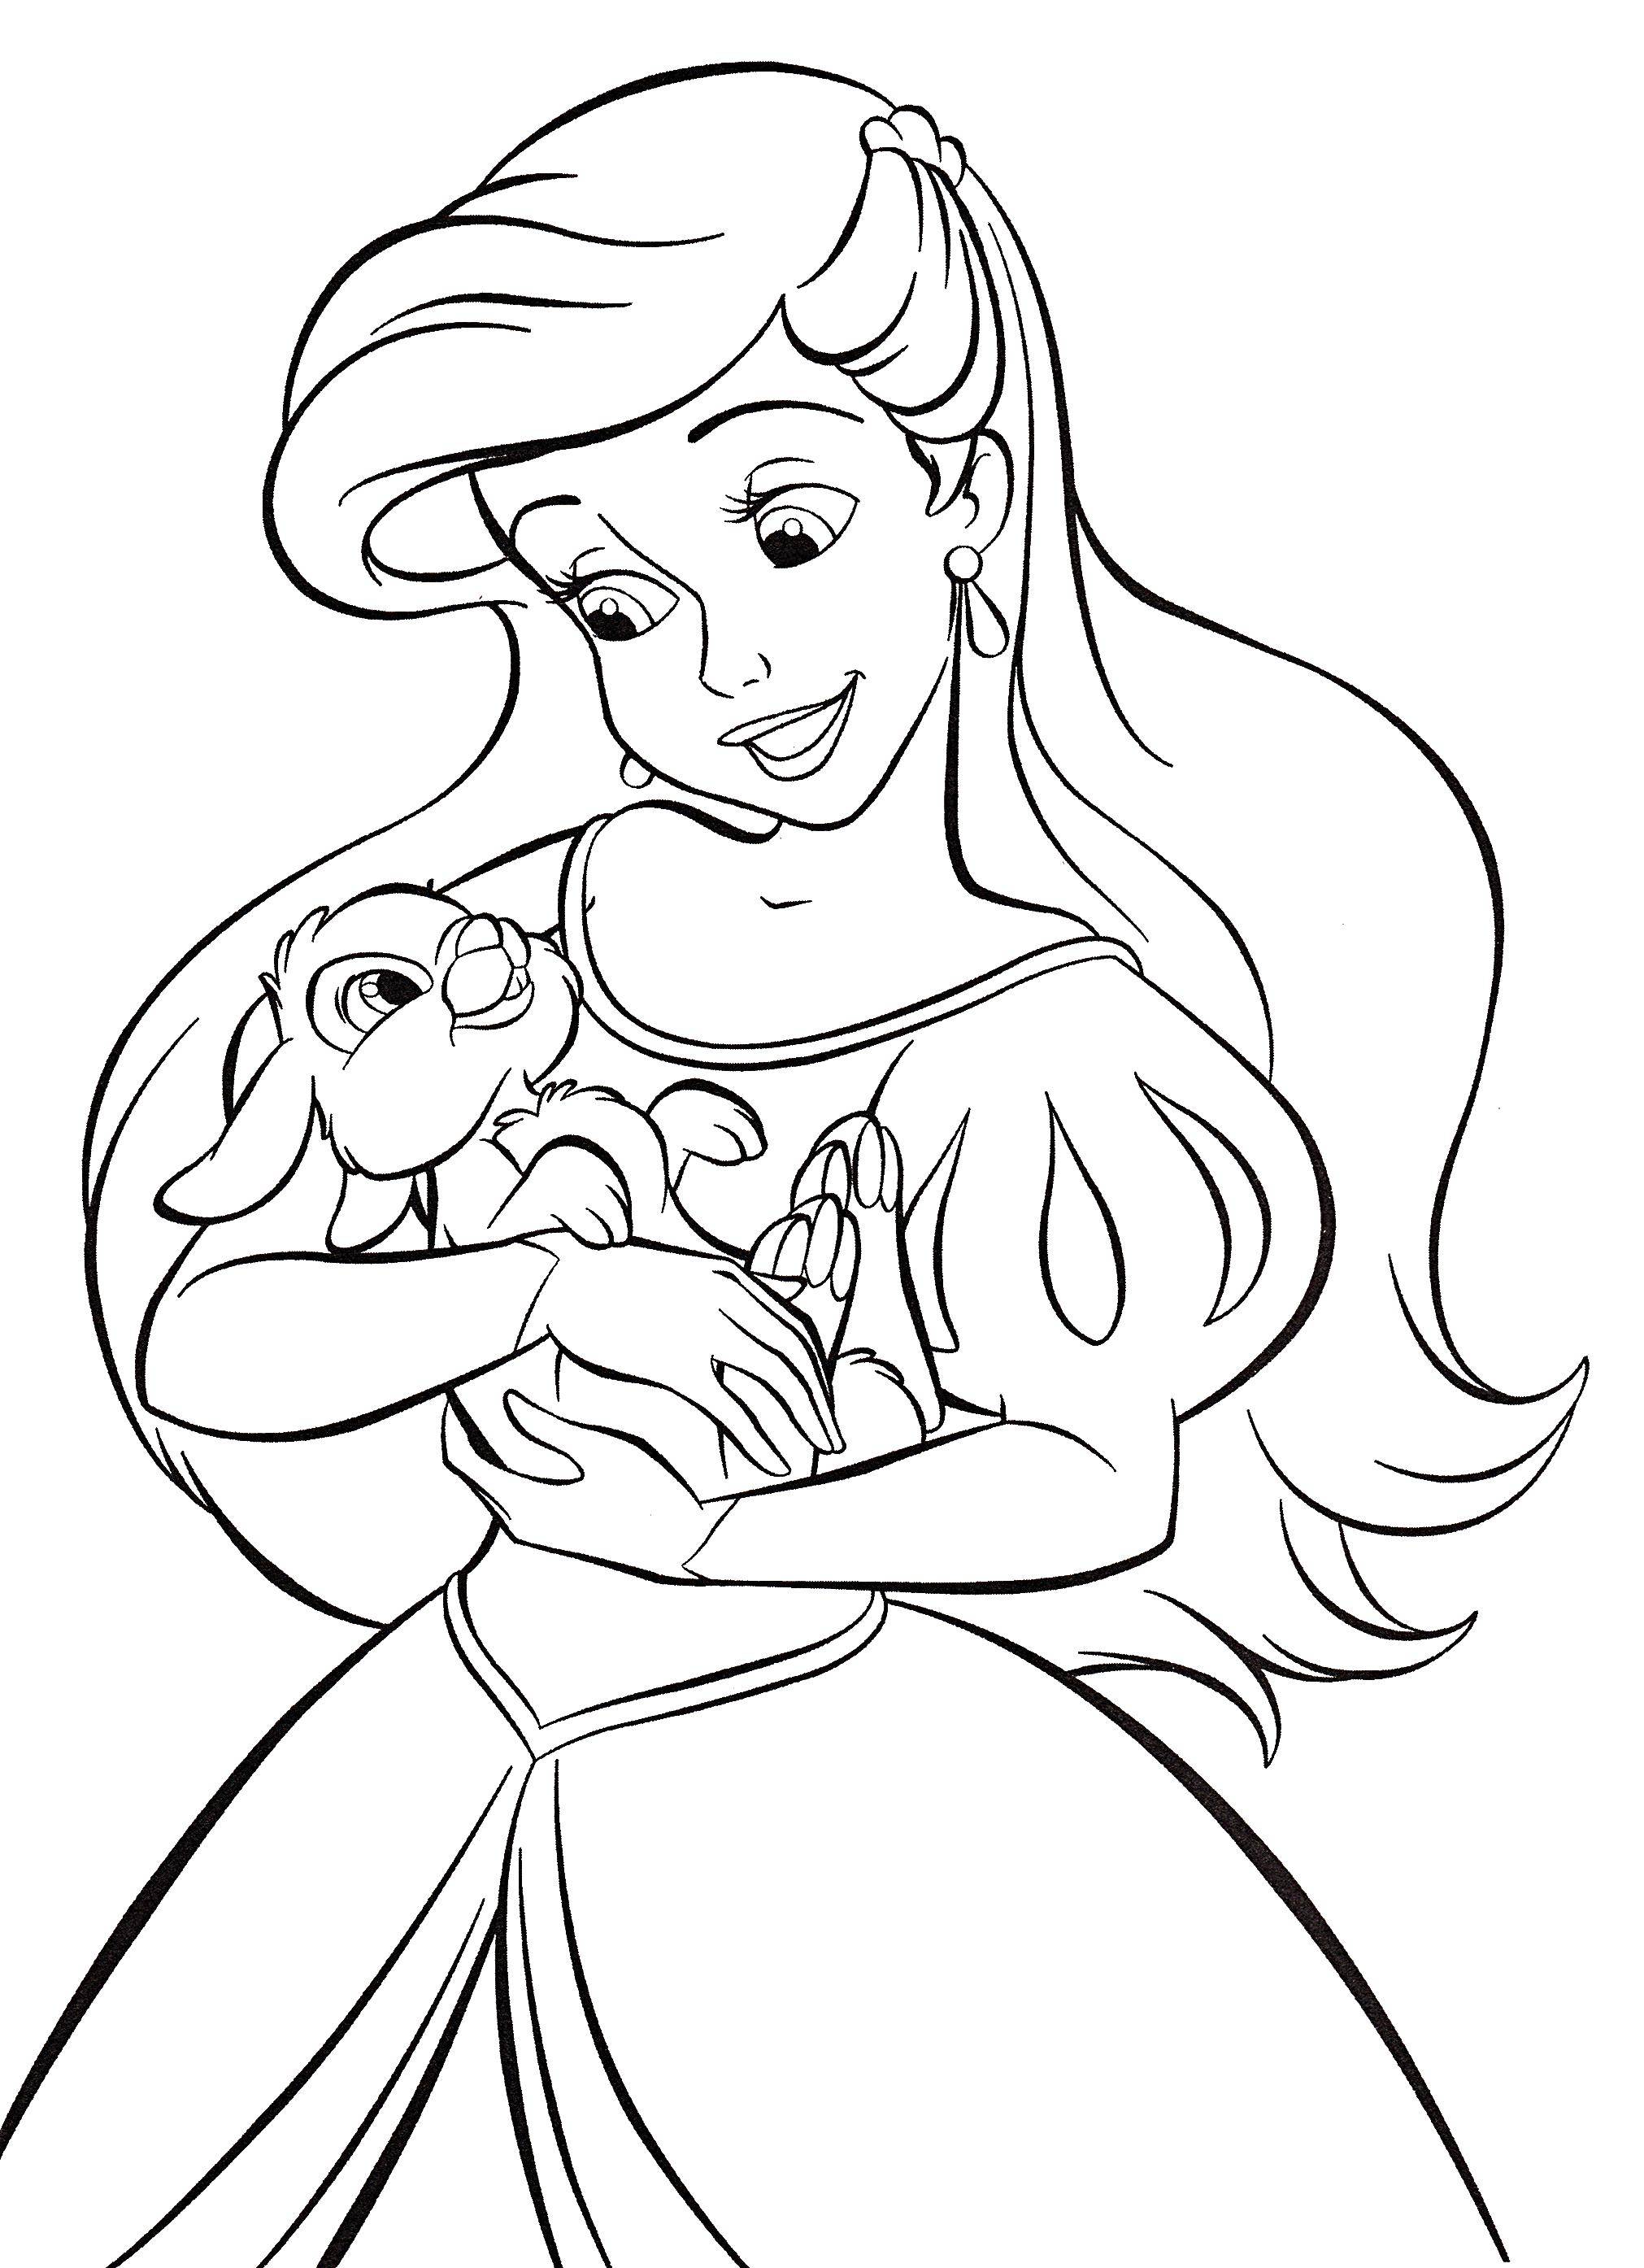 Coloring Ariel holds a Bunny. Category The little mermaid. Tags:  Disney, the little mermaid, Ariel.